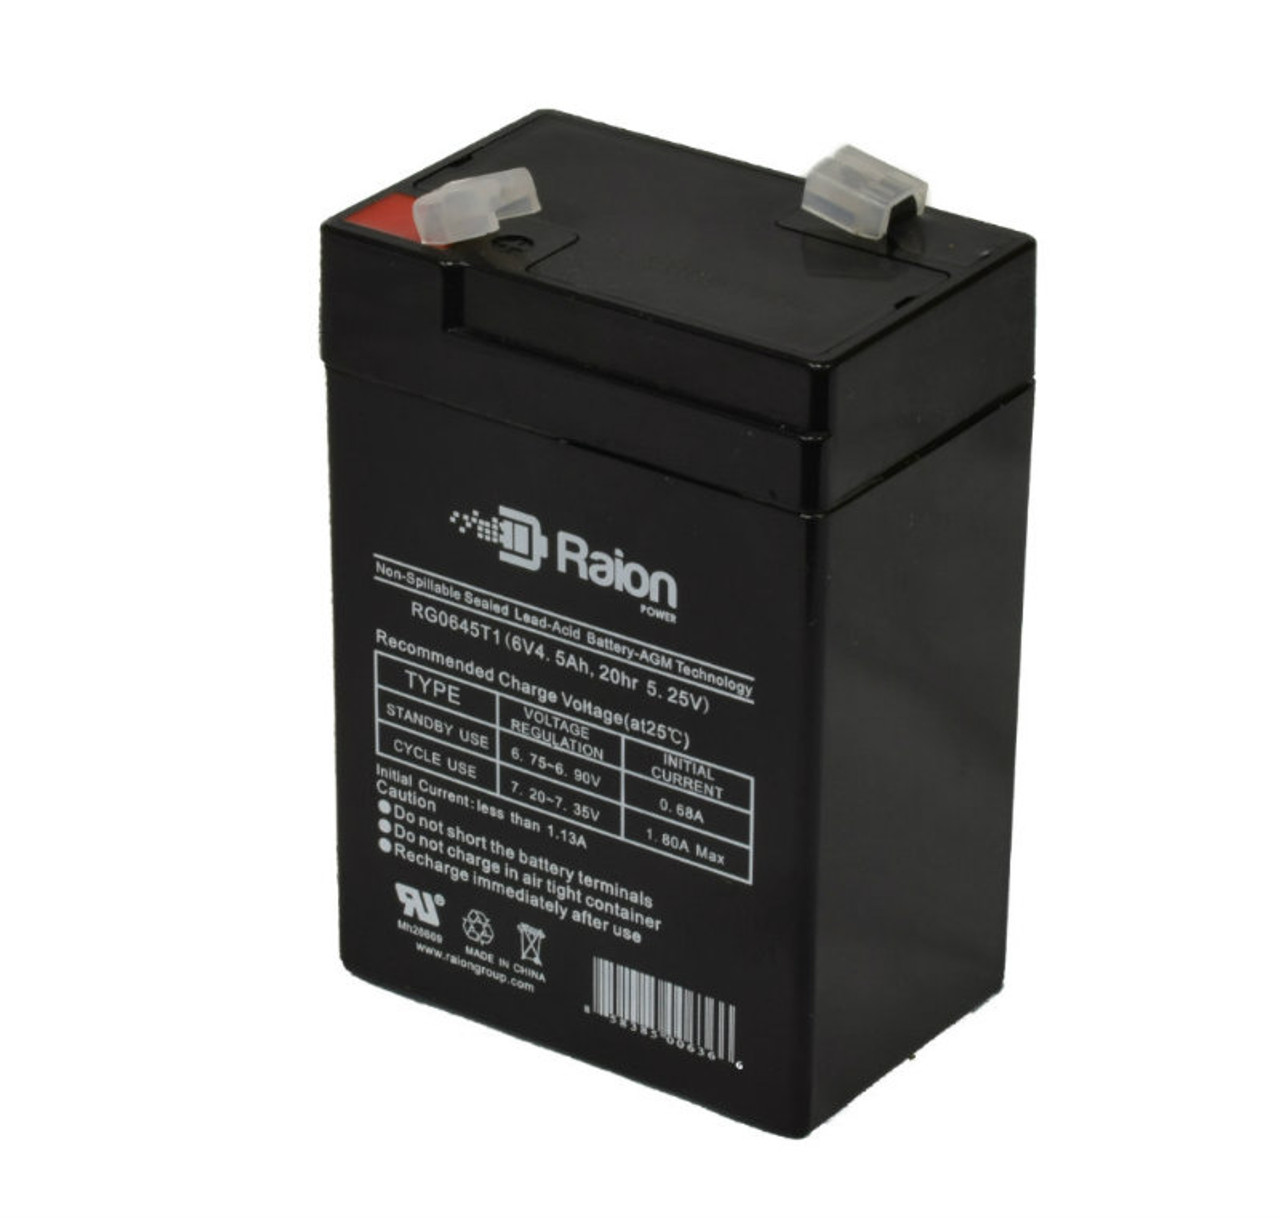 Raion Power RG0645T1 Replacement Battery for Gallagher S20 V2 (2018 Later)